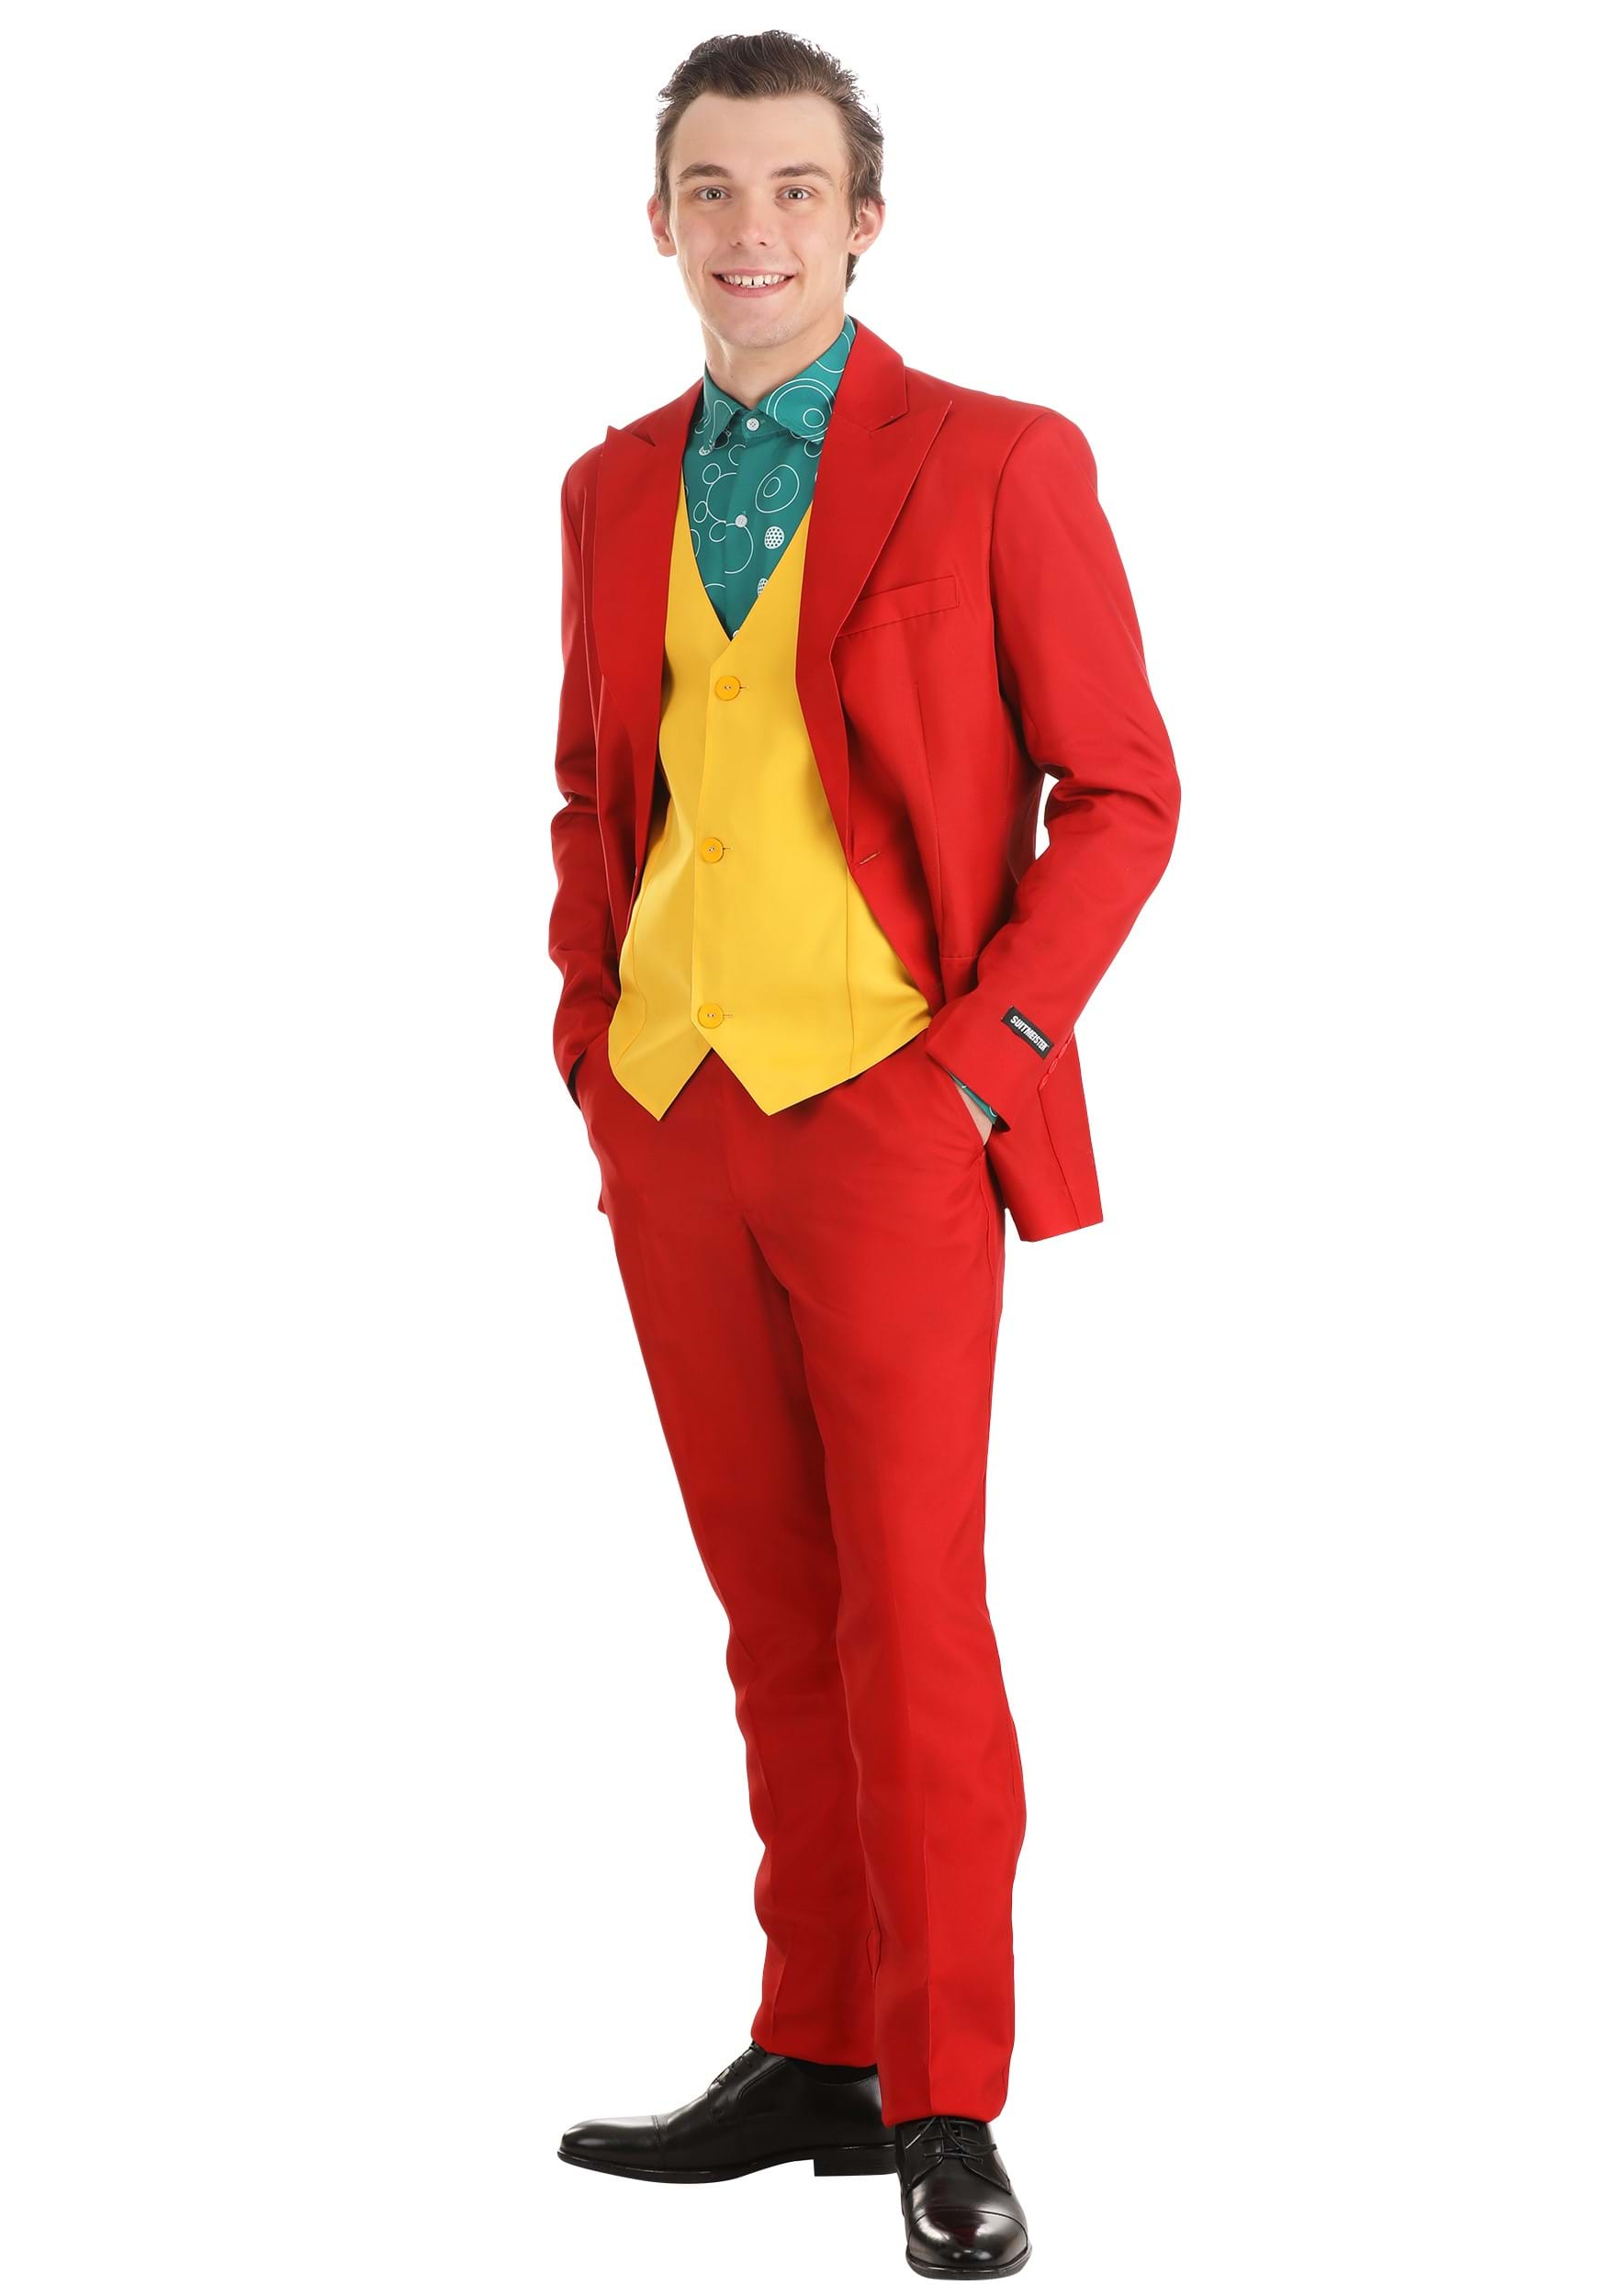 Image of Dark Clown Comedian Suit Costume ID OSCSMS-1039-M